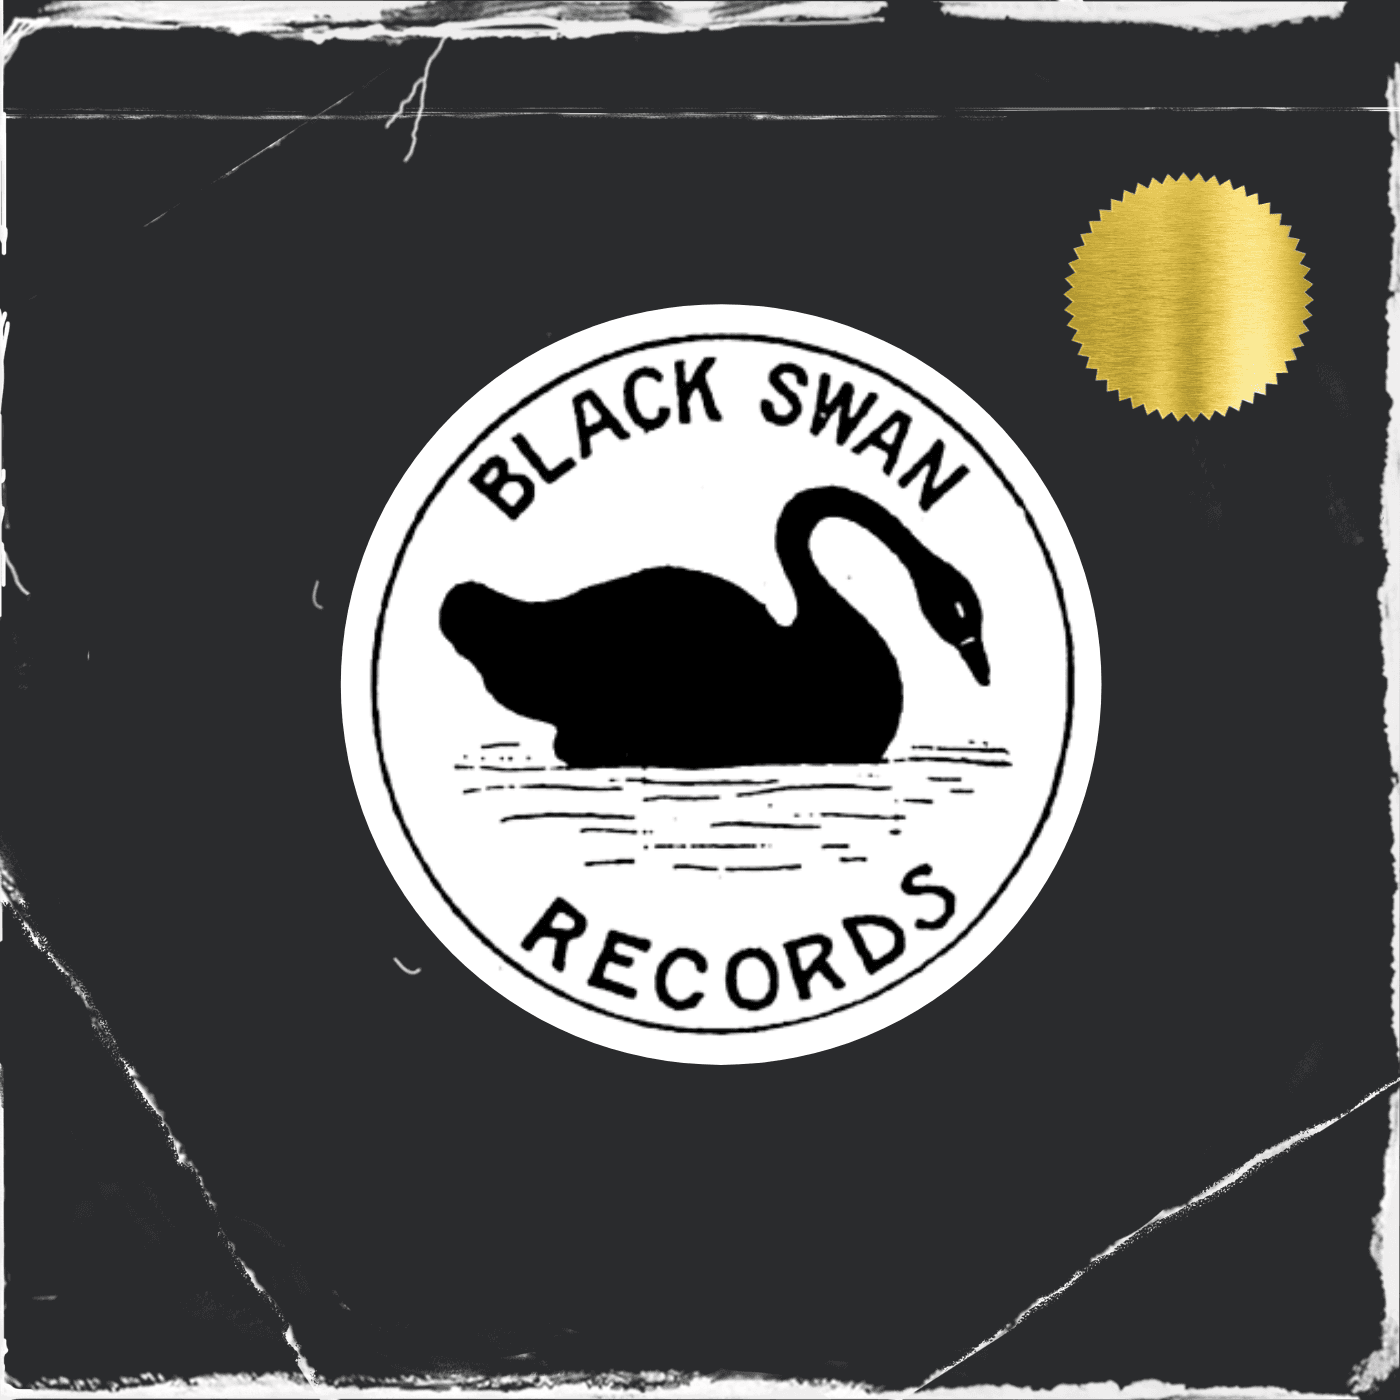 Thumbnail for "The Rise and Fall of Black Swan Records".